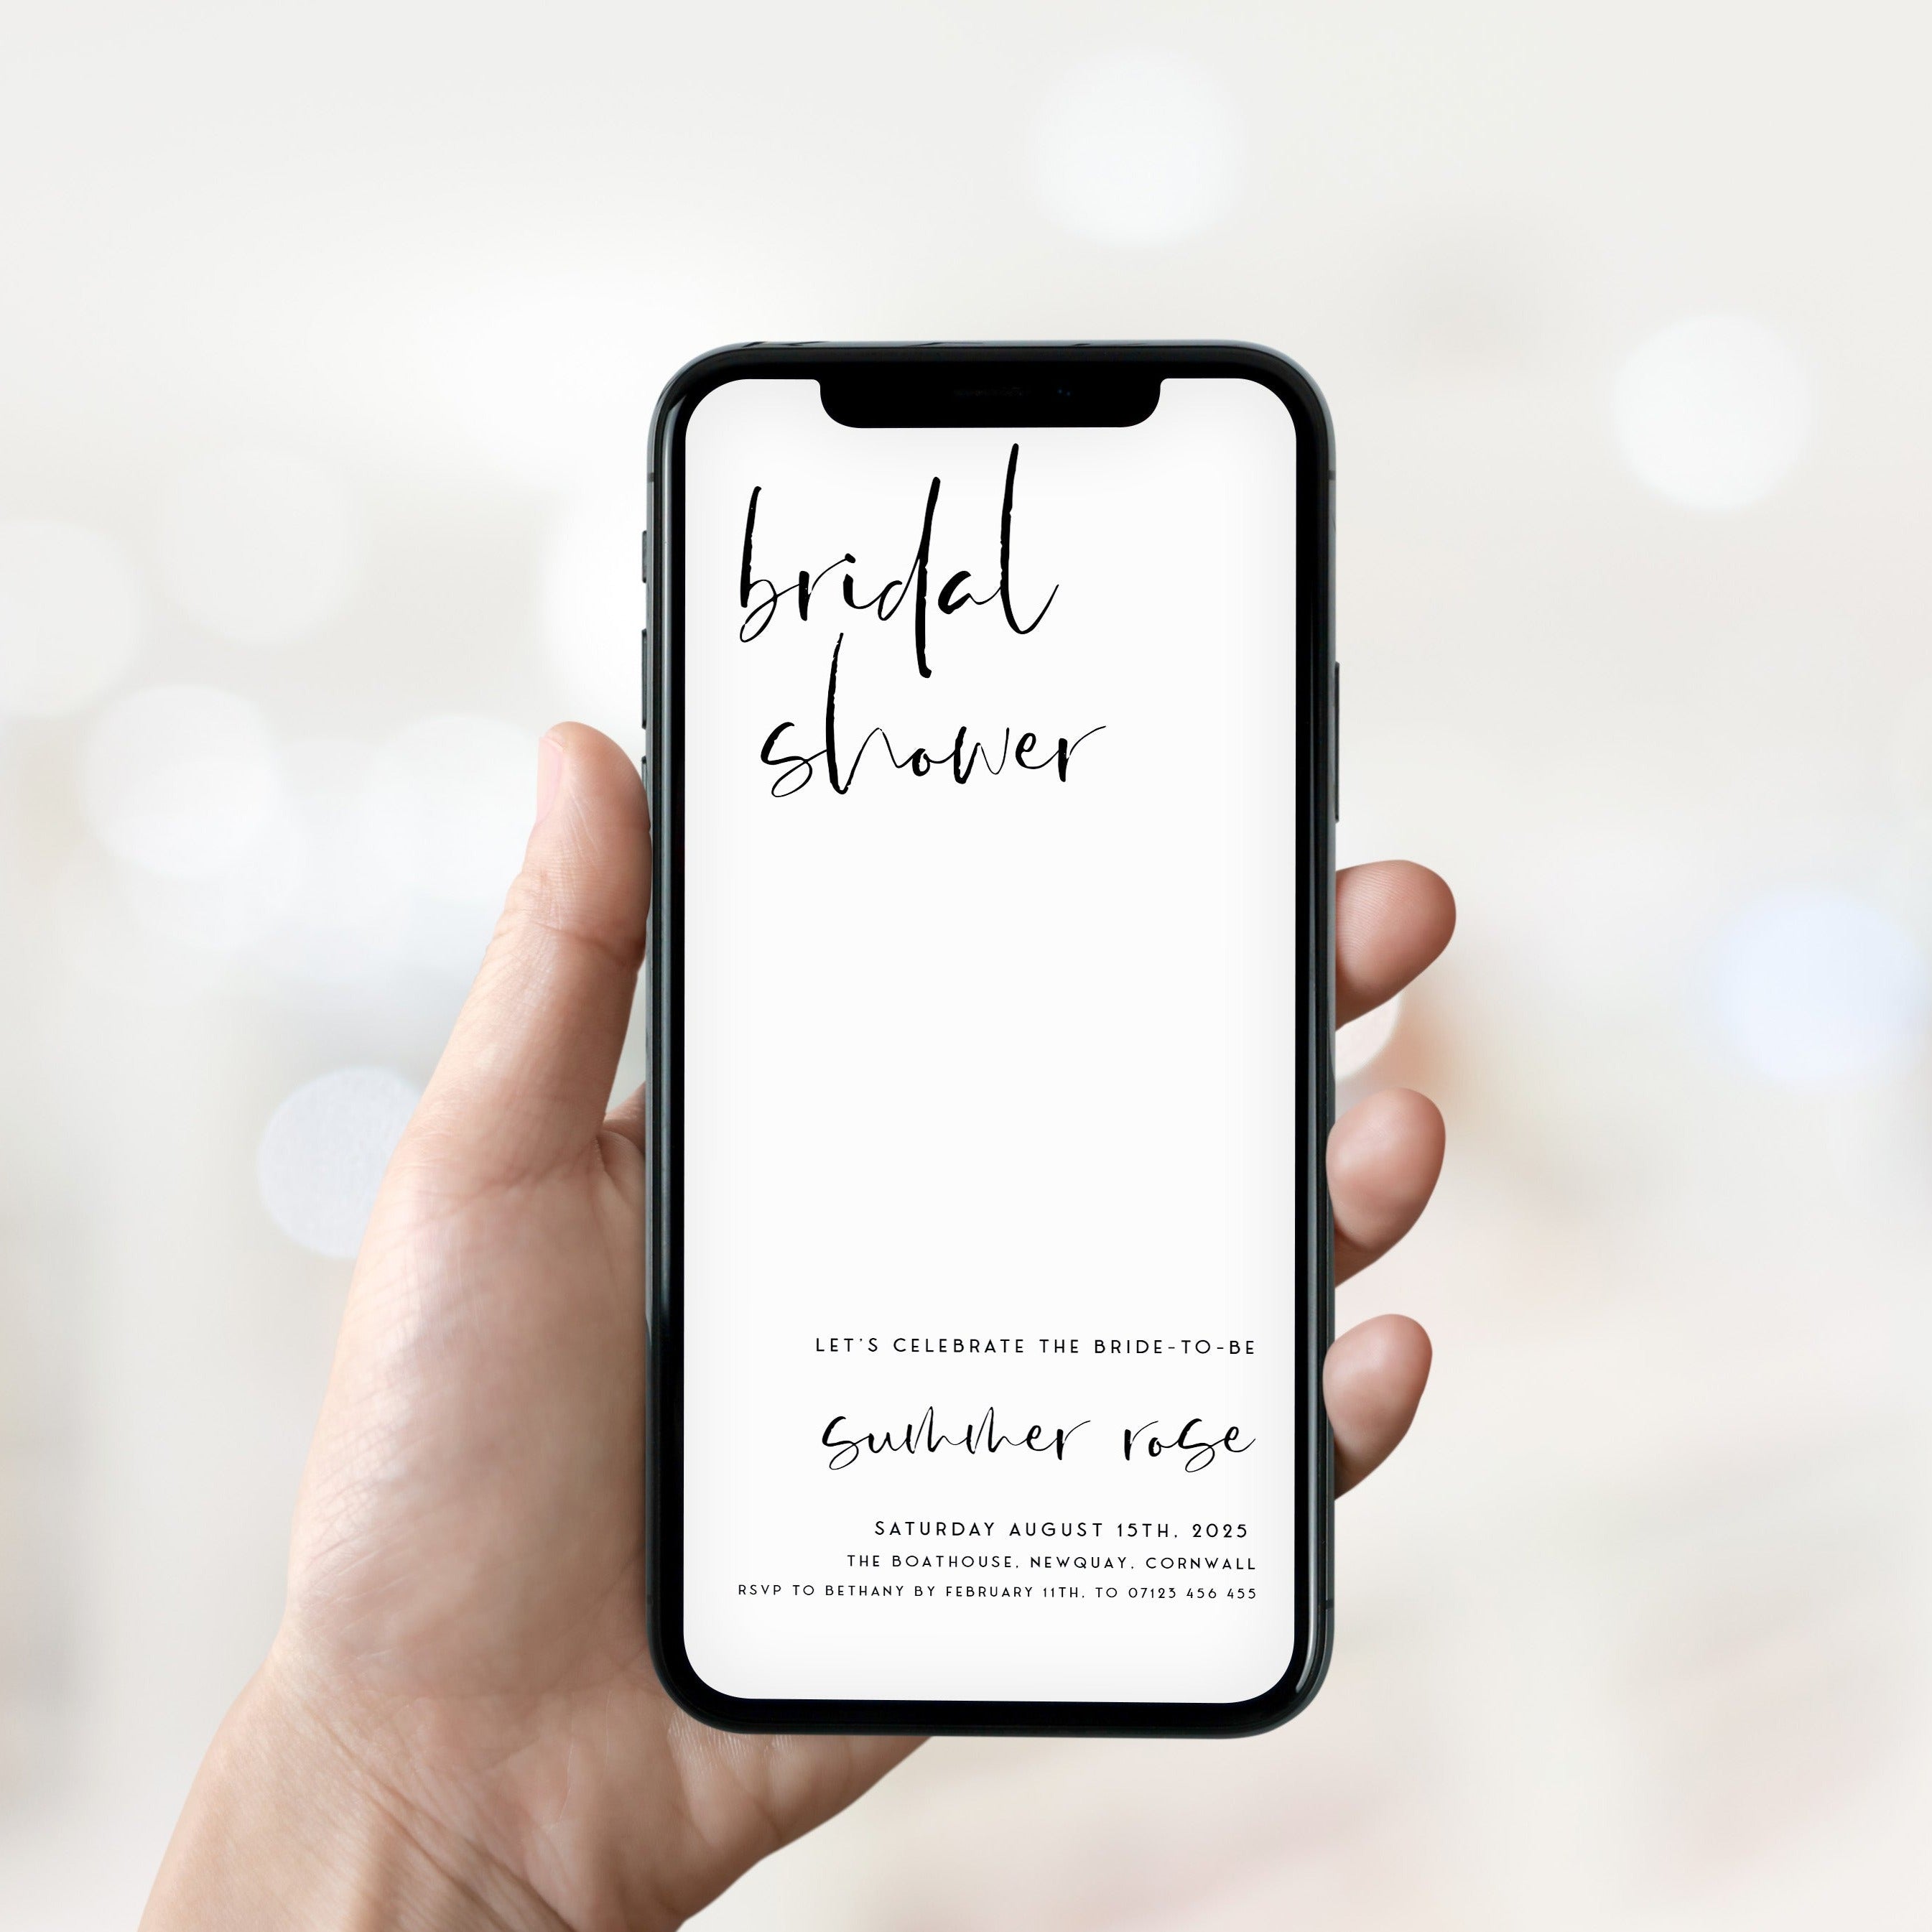 Fully editable and printable bridal shower mobile invitation with a modern minimalist design. Perfect for a modern simple bridal shower themed party